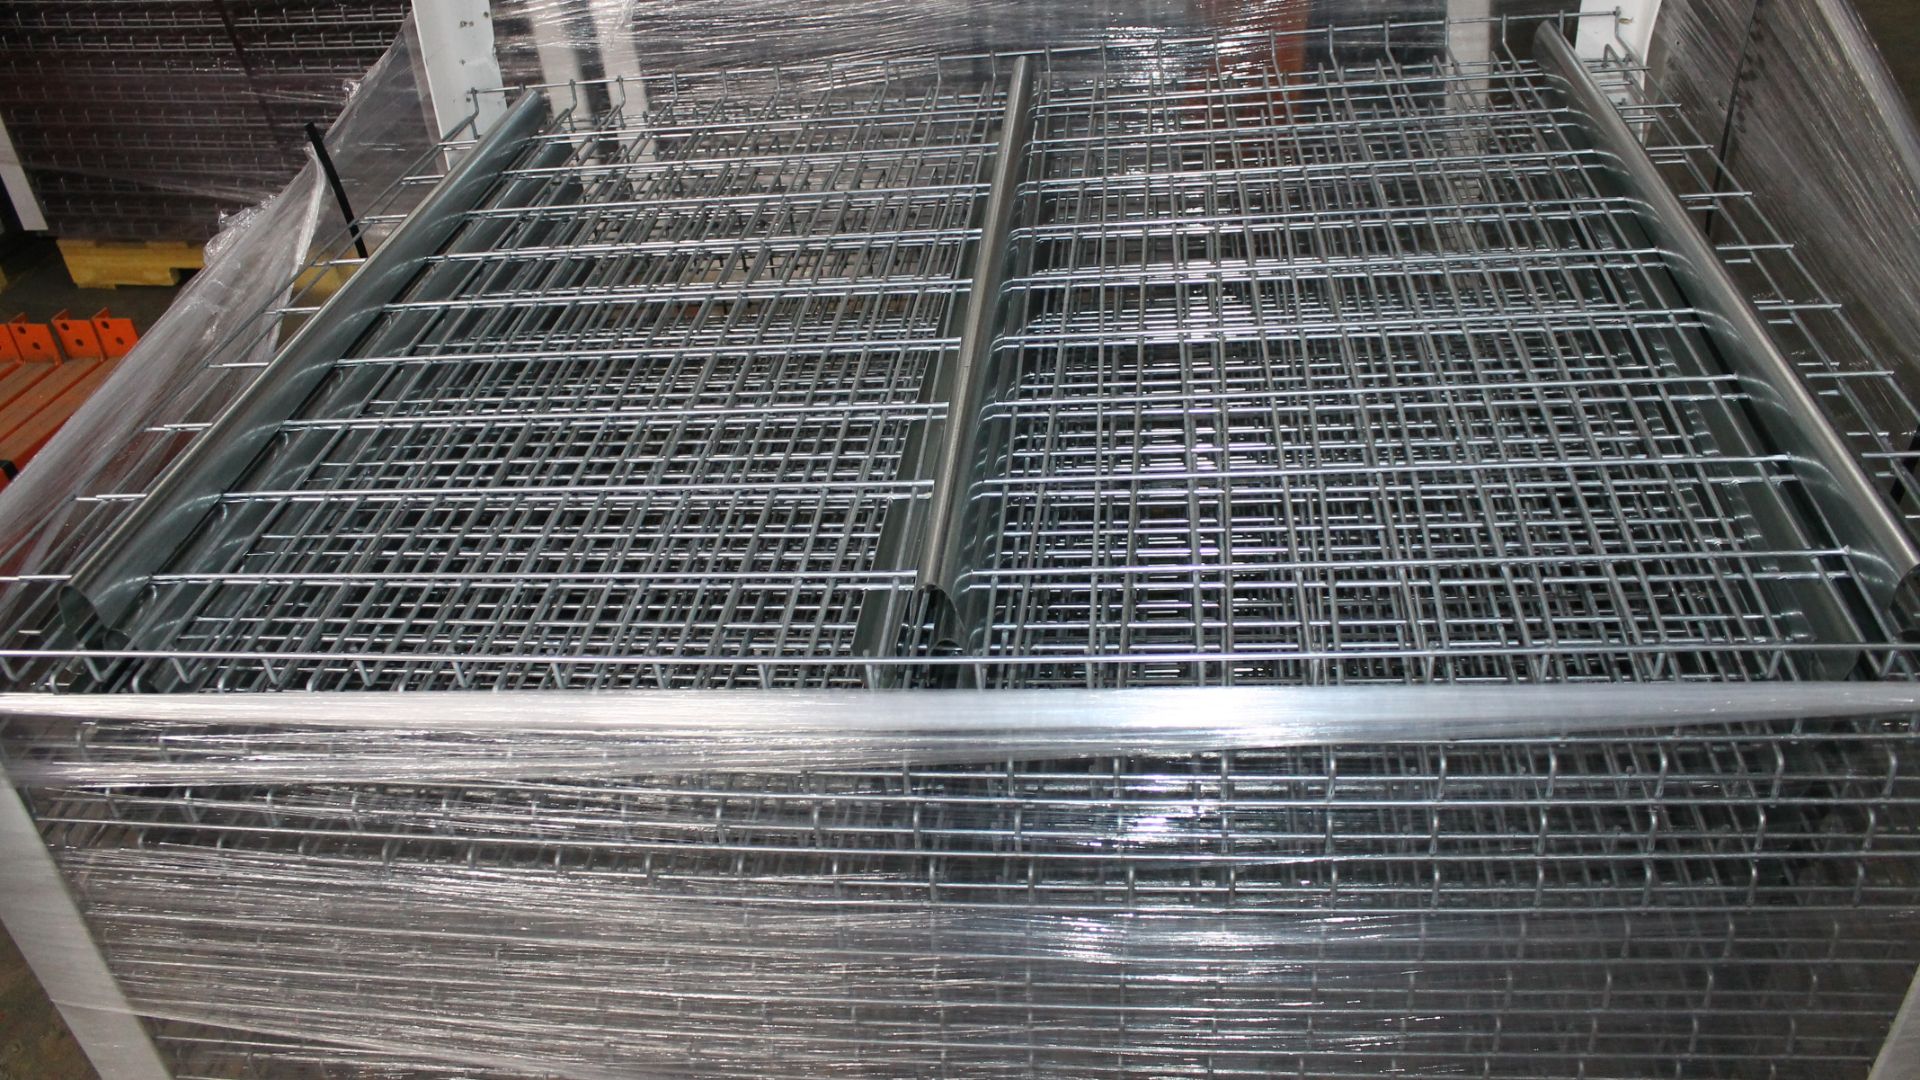 NEW 40 PCS OF STANDARD 42" X 53" WIREDECK - 2050 LBS CAPACITY - Image 2 of 2